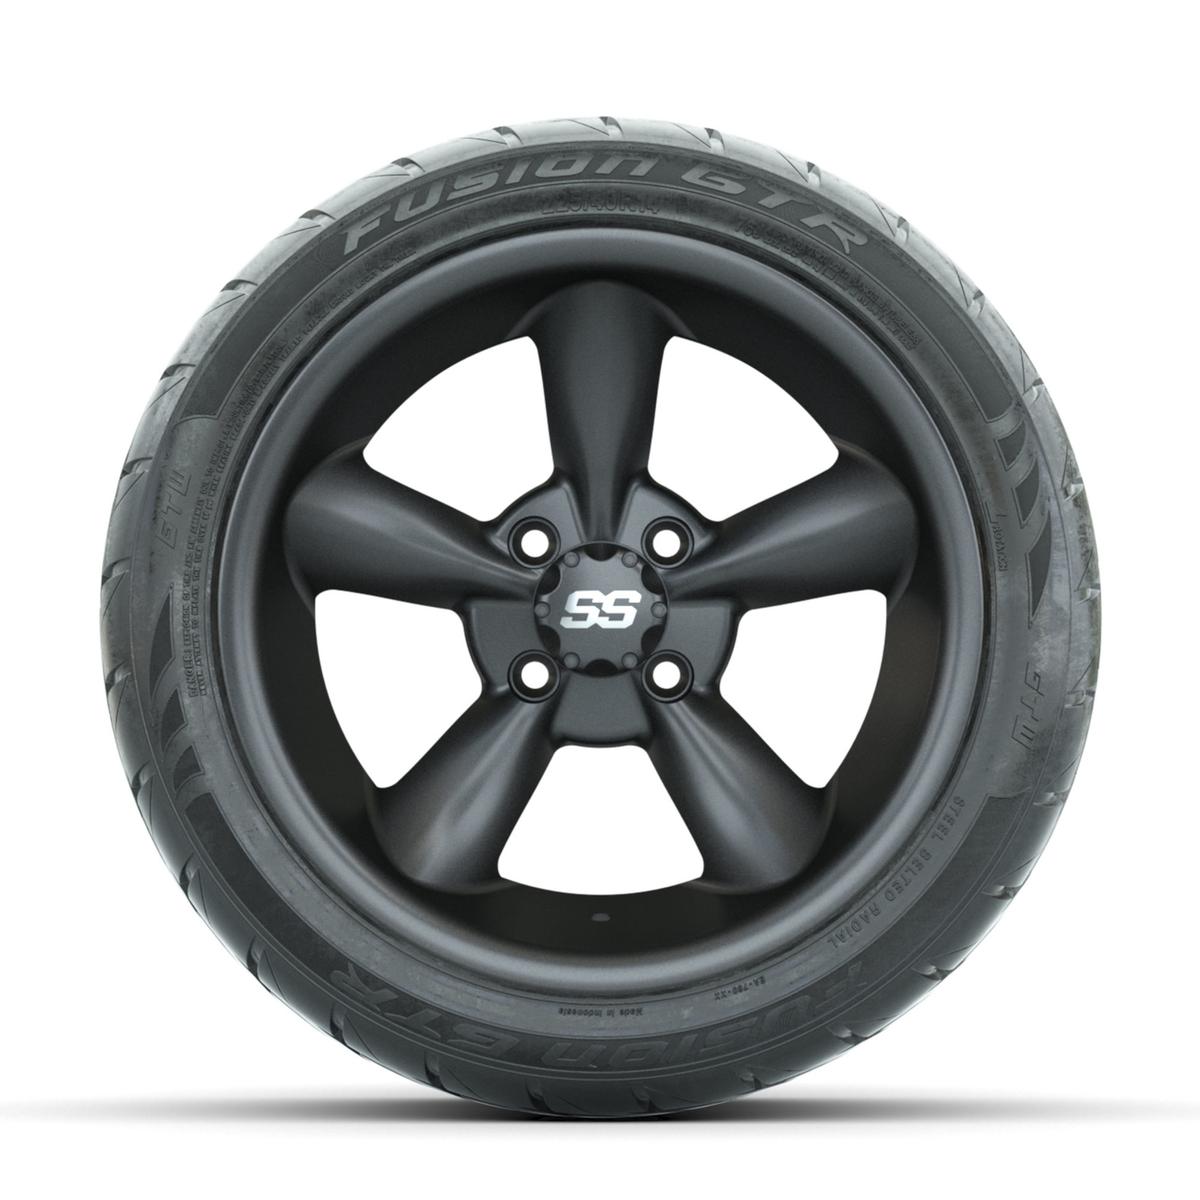 GTW Godfather Matte Grey 14 in Wheels with 225/40-R14 Fusion GTR Street Tires – Full Set